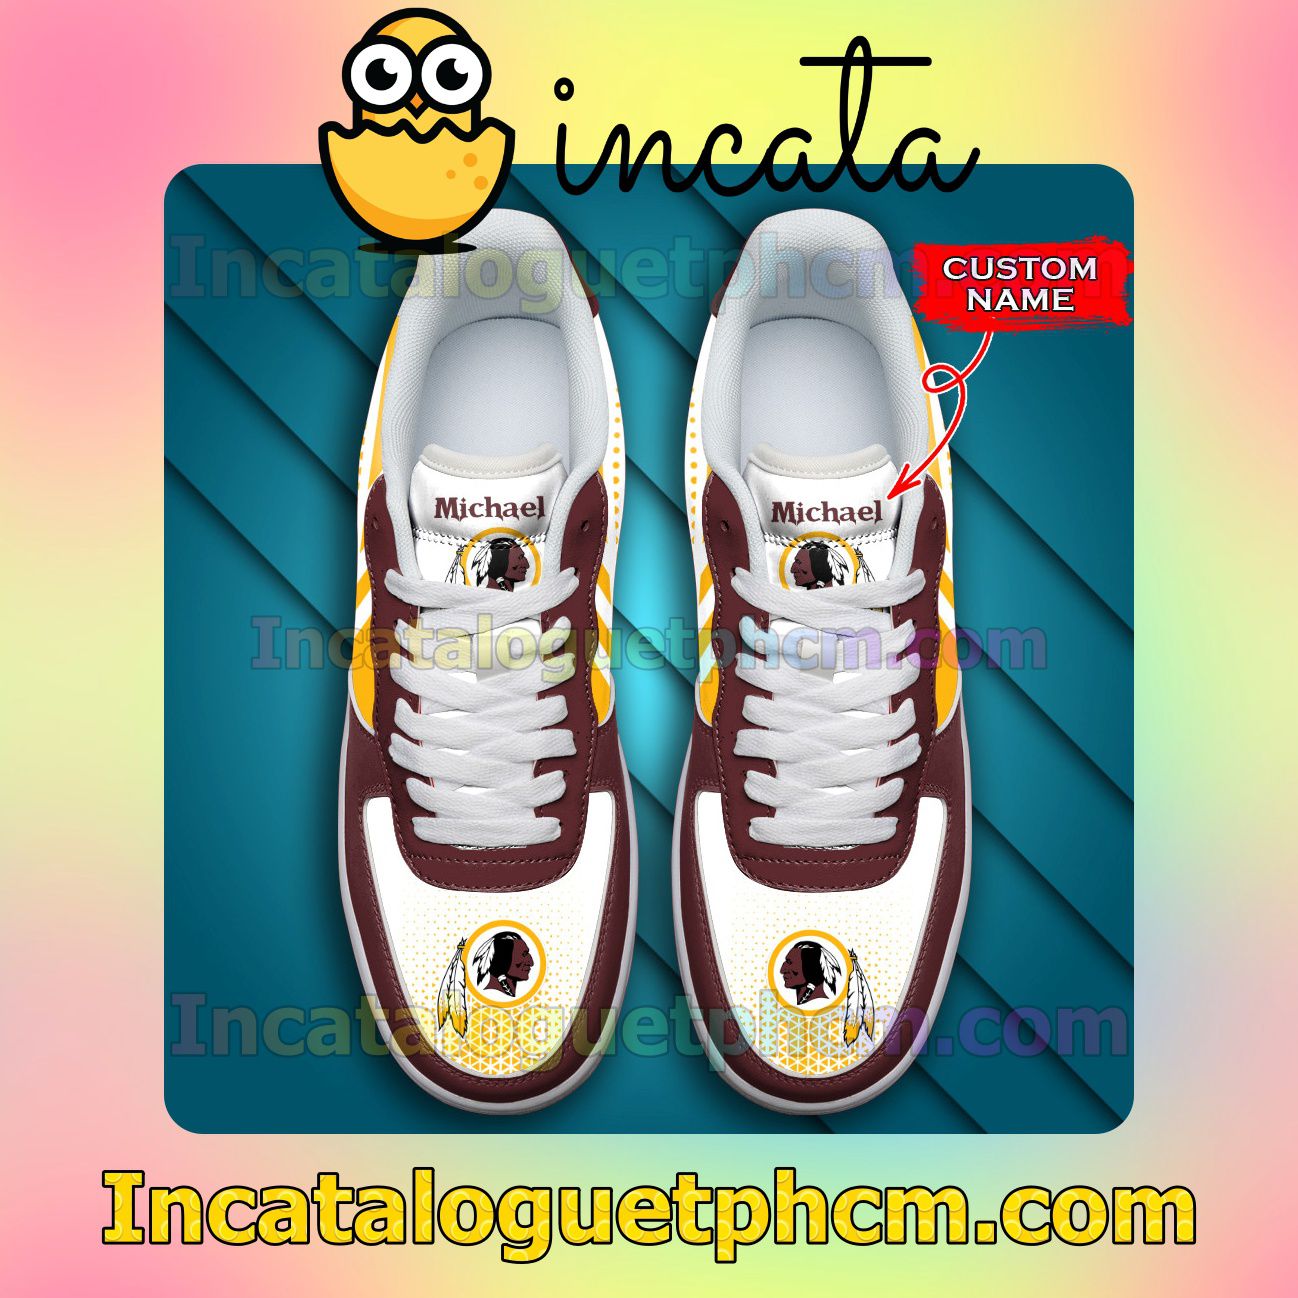 Hot Personalized NFL Washington Redskins Custom Name Nike Low Shoes Sneakers